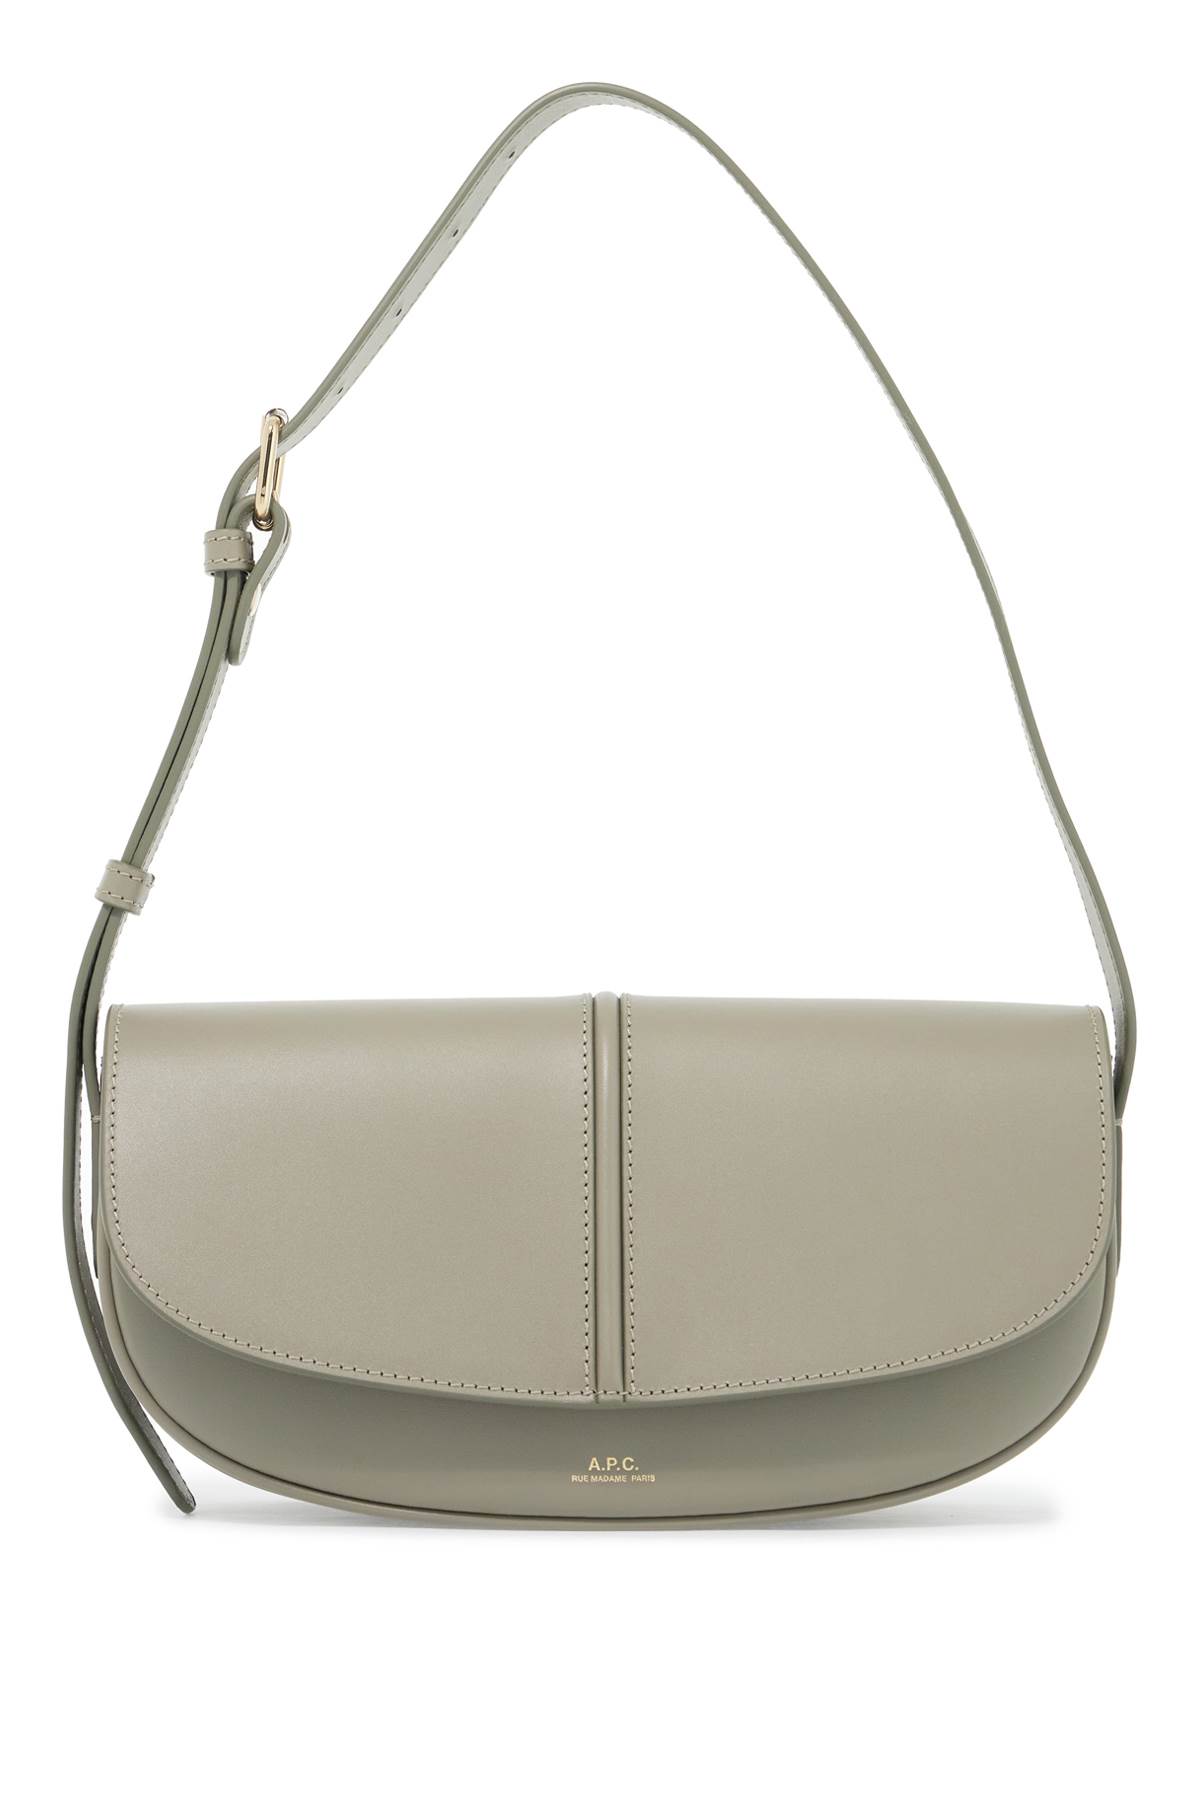 Apc Betty Shoulder Bag In Vert Taupe (green)